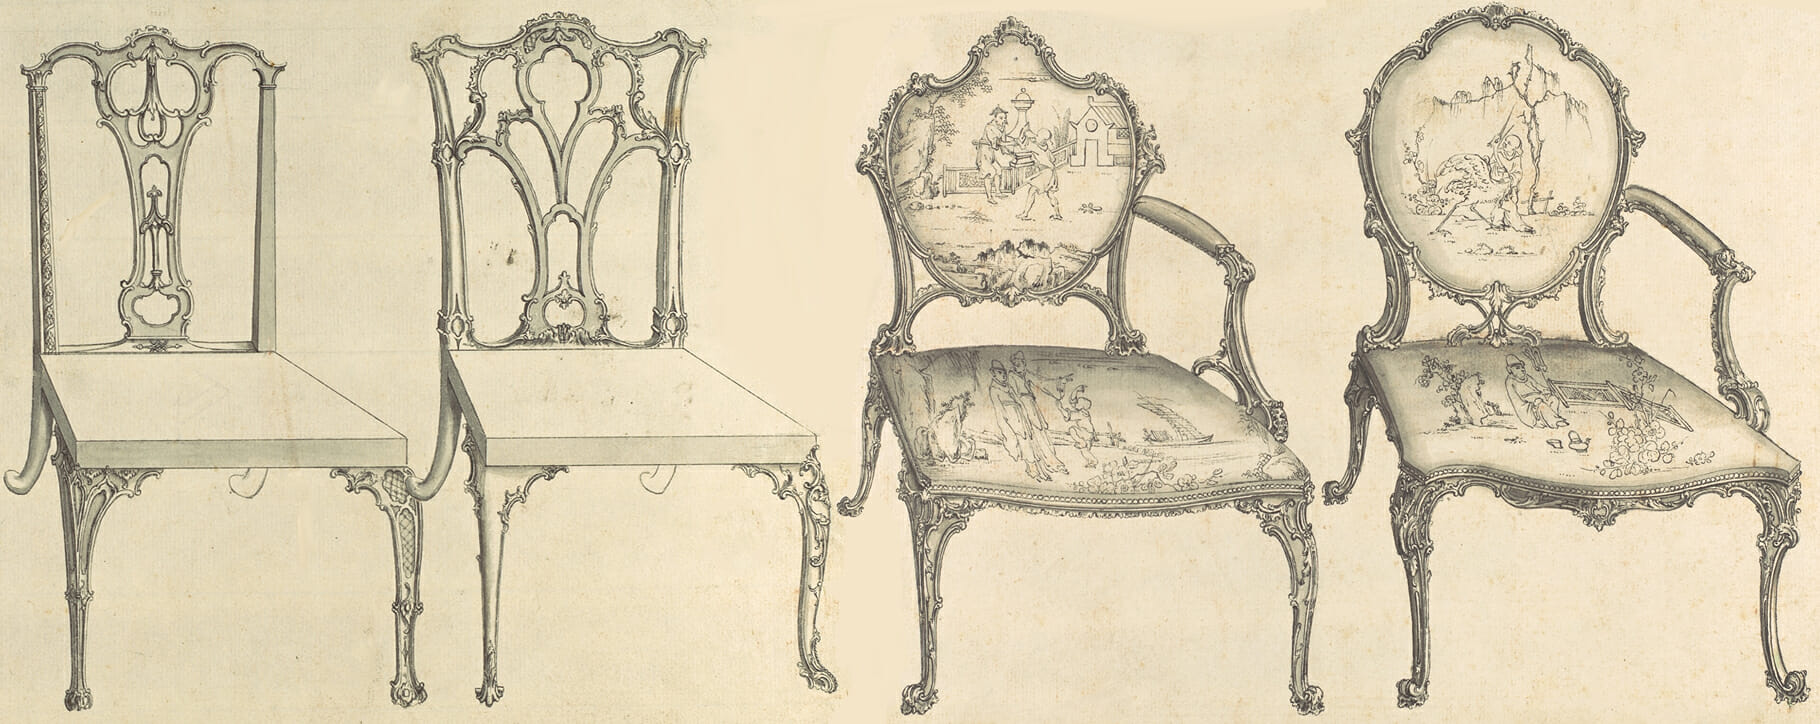 Chippendale Designs 1750